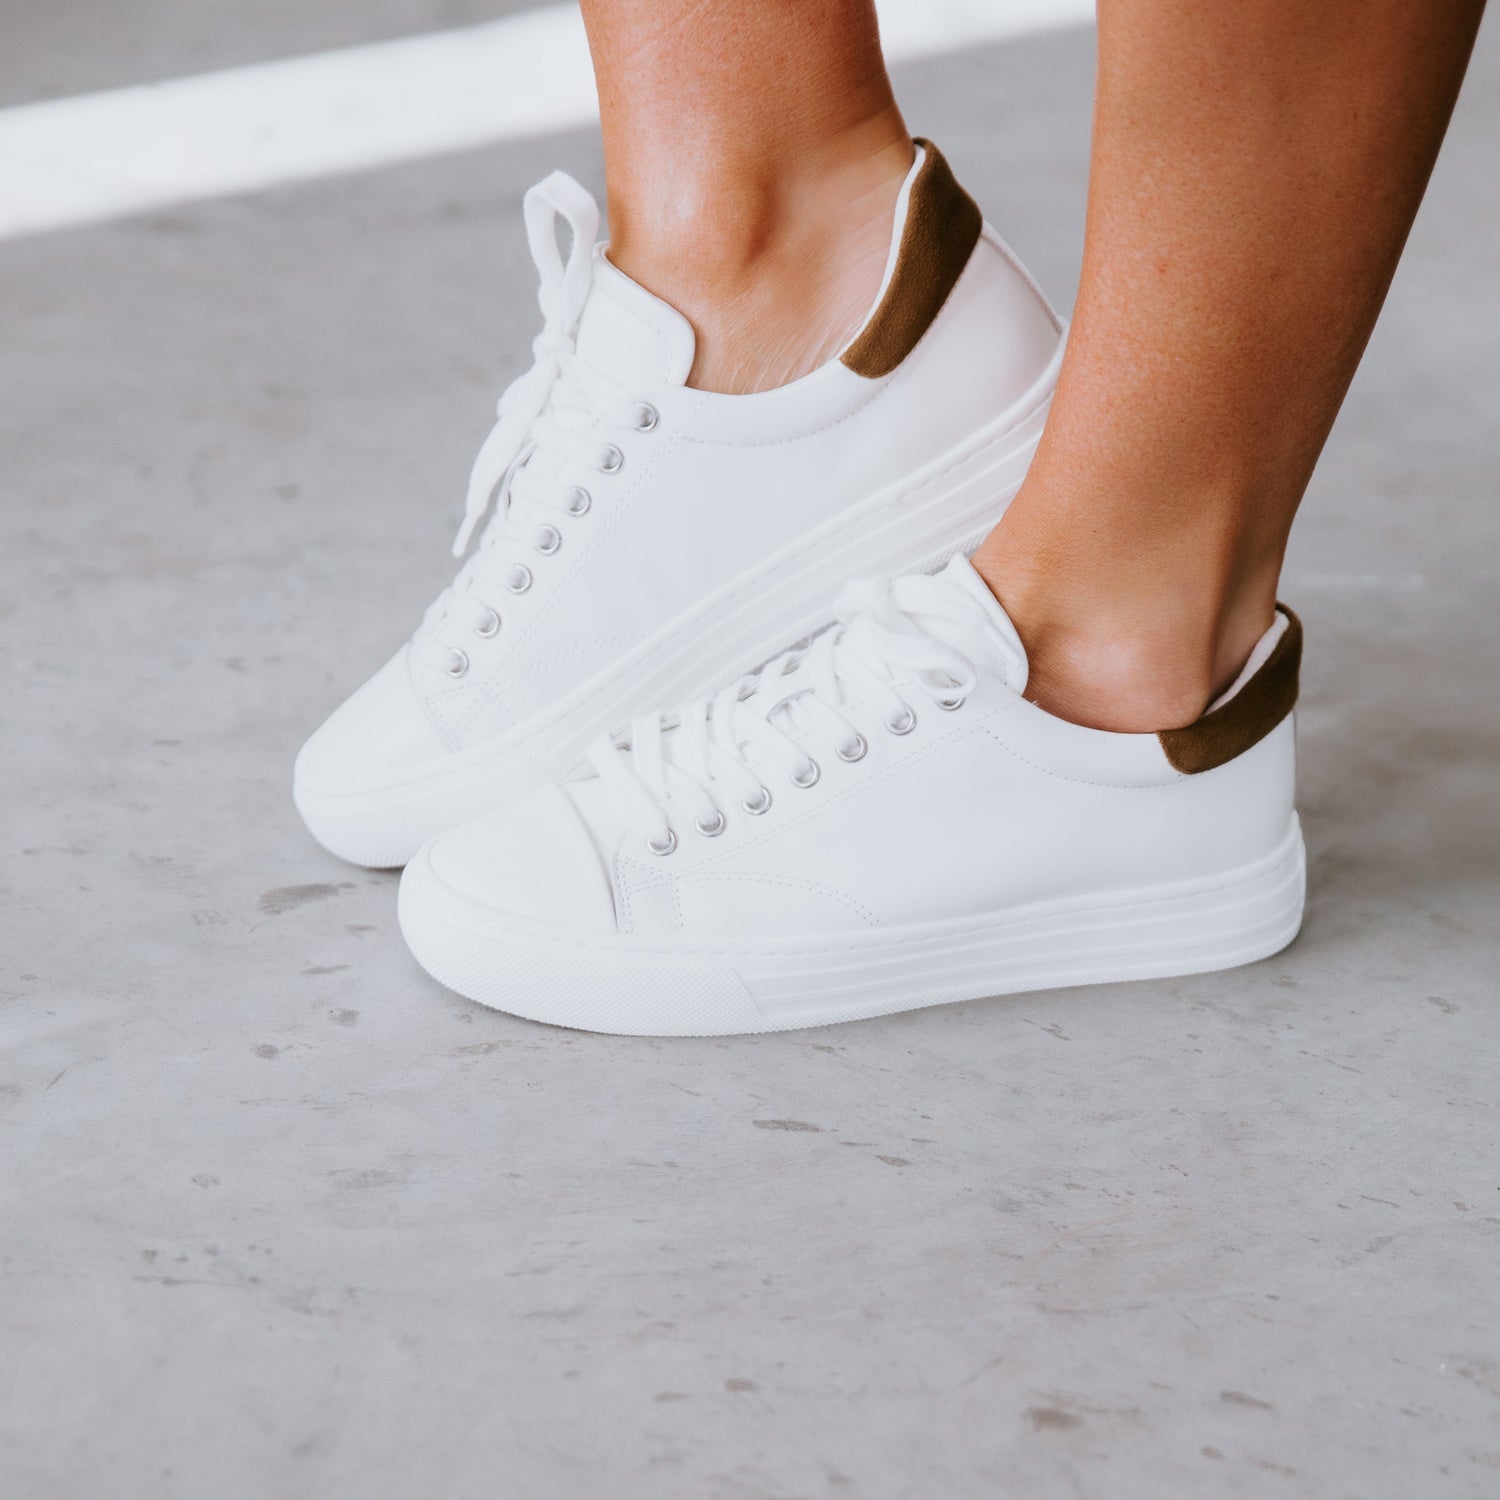 Steve Madden Captivate Sneakers – Lauriebelles